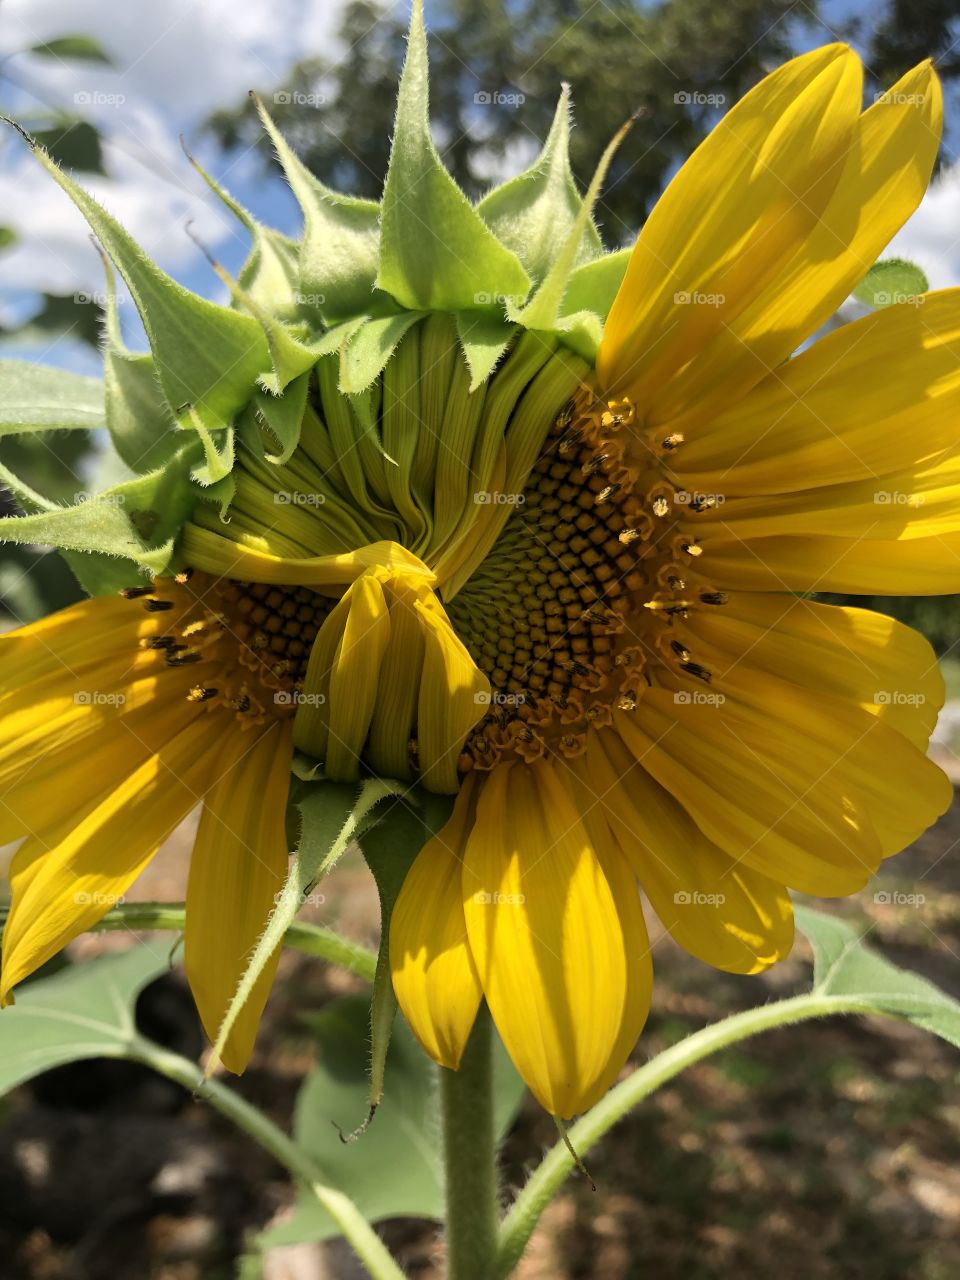 This sun flower is winking 